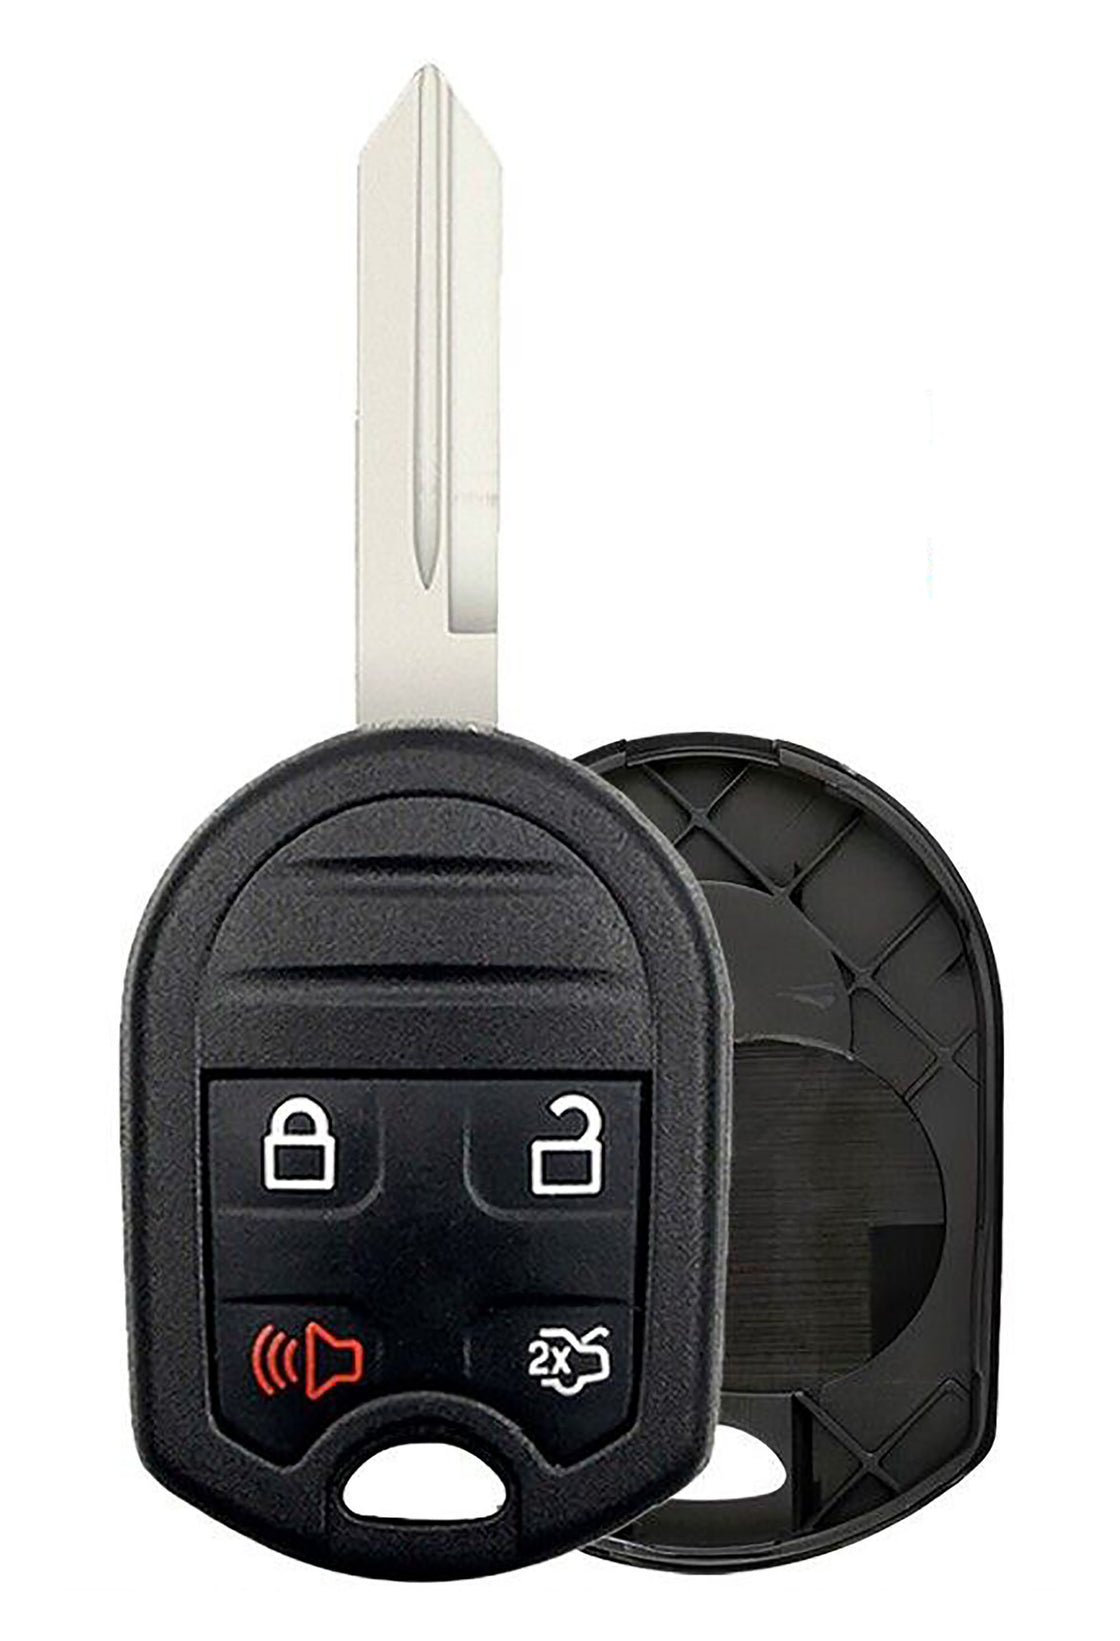 1x New Replacement SHELL / CASE Remote Key Fob Compatible with & Fit For Ford Mazda Lincoln Mercury - MPN CWTWB1U793-FL-12 (NO electronics or Chip inside)